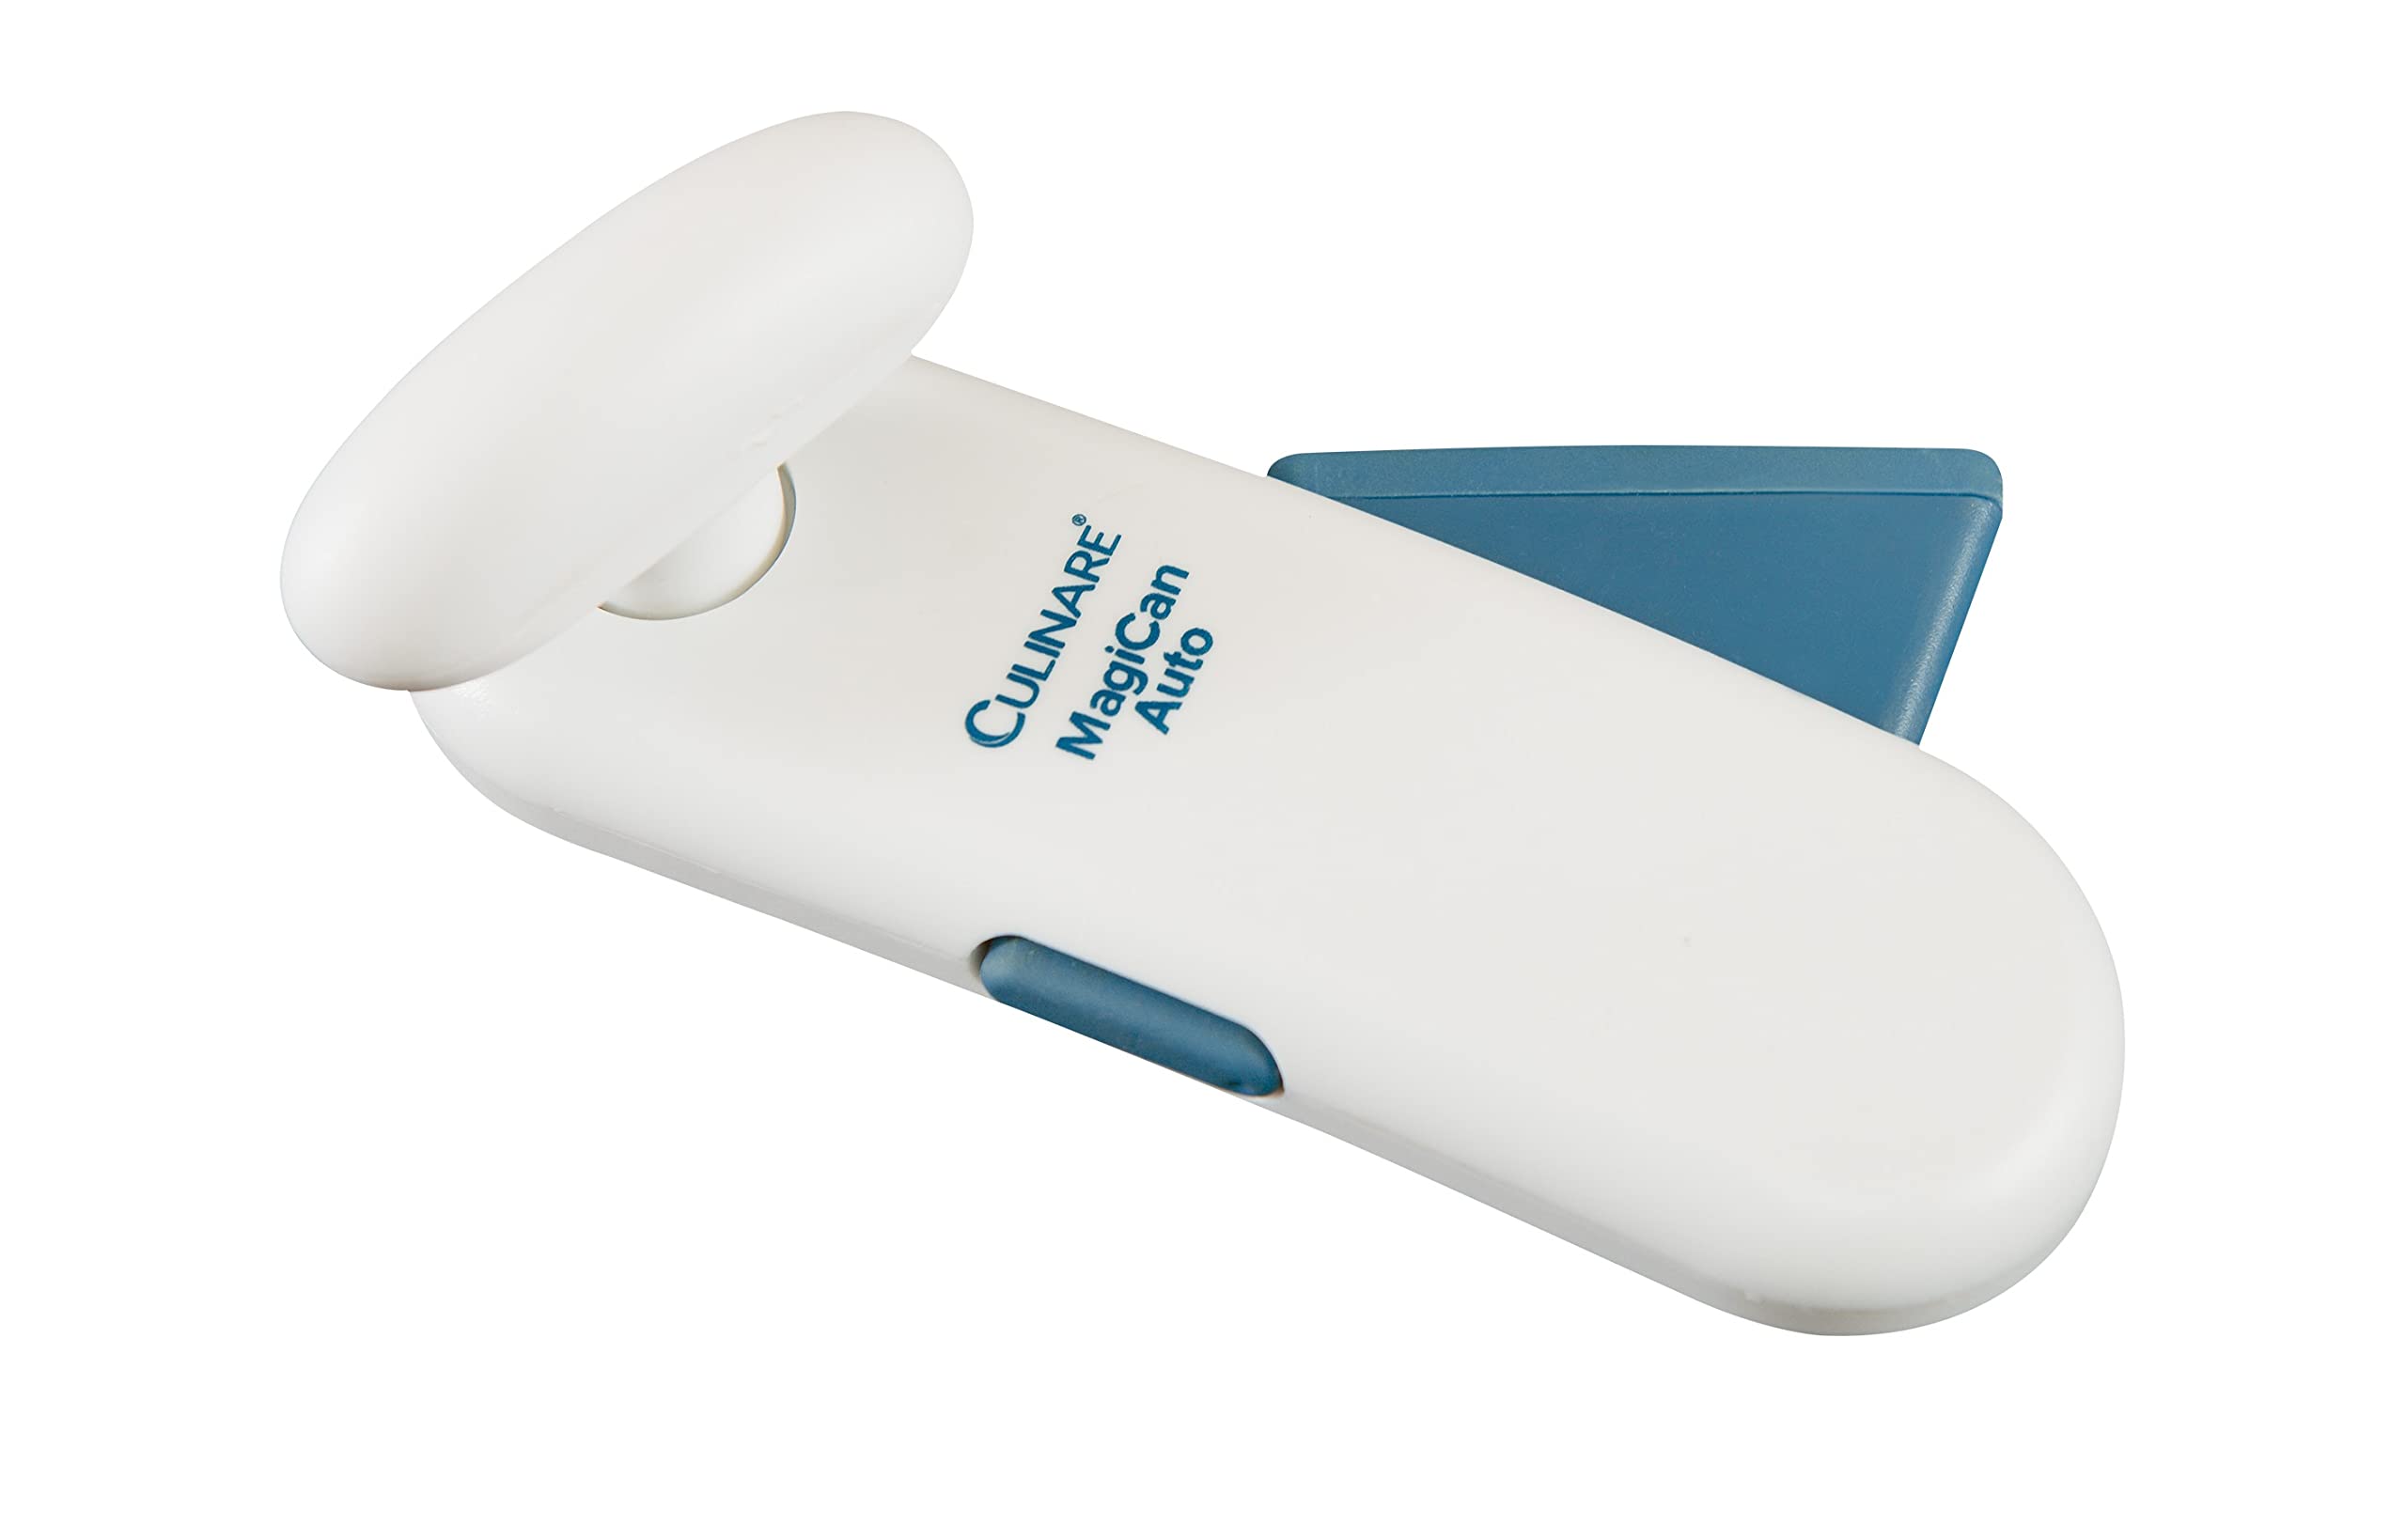 Culinare C10011 MagiCan Auto 2 Can Opener - Manual opener with a patented cutting system and a strong clamp mechanism for single-hand use, in white, 20 x 5 x 15 cm